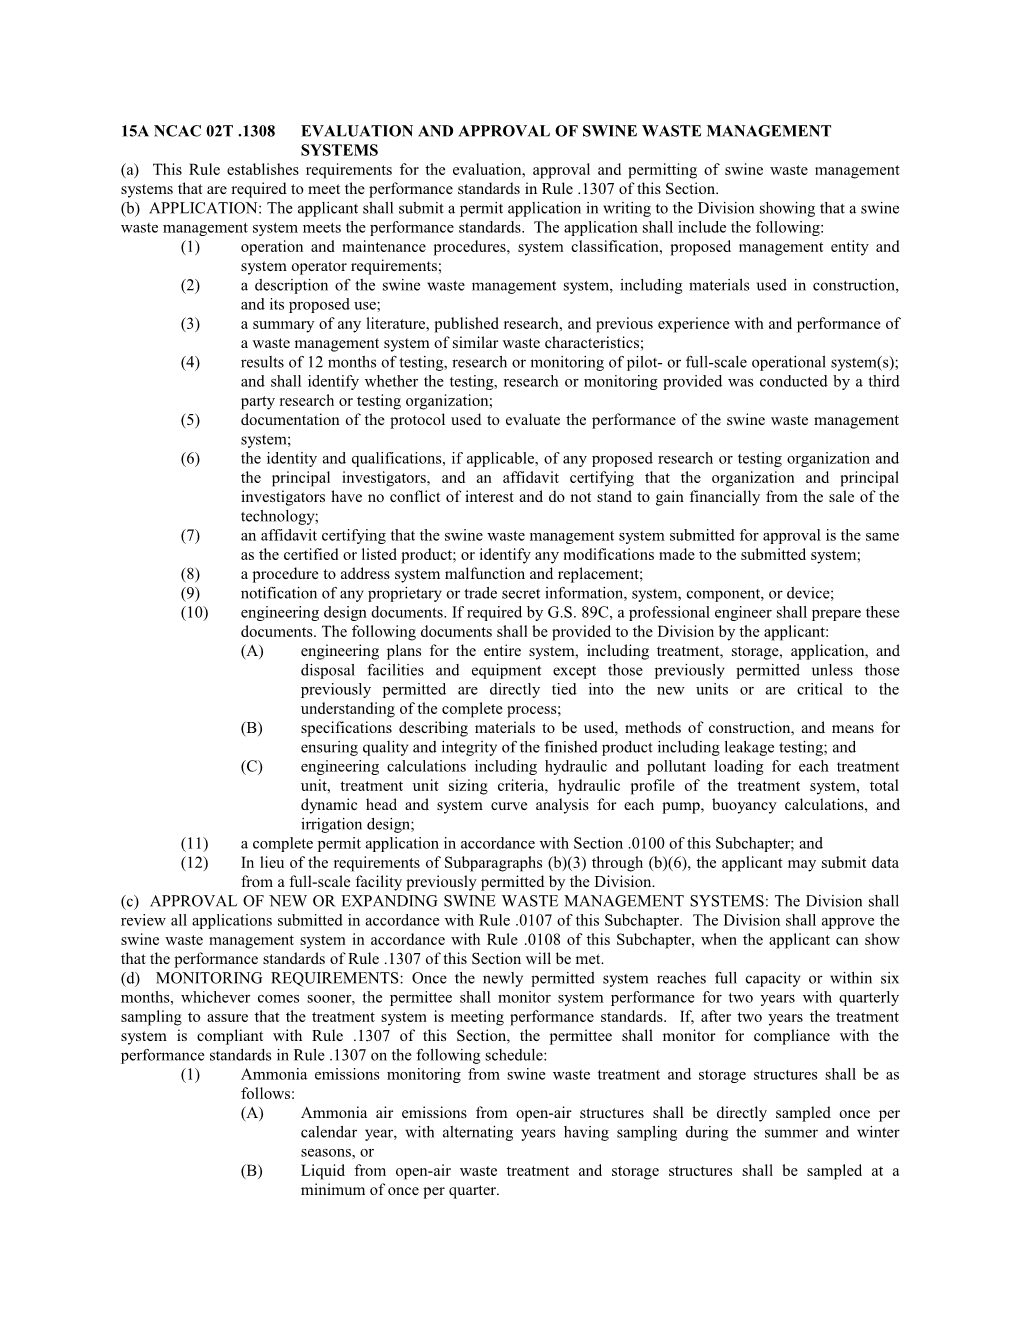 15A Ncac 02T .1308Evaluation and Approval of Swine Waste Management Systems